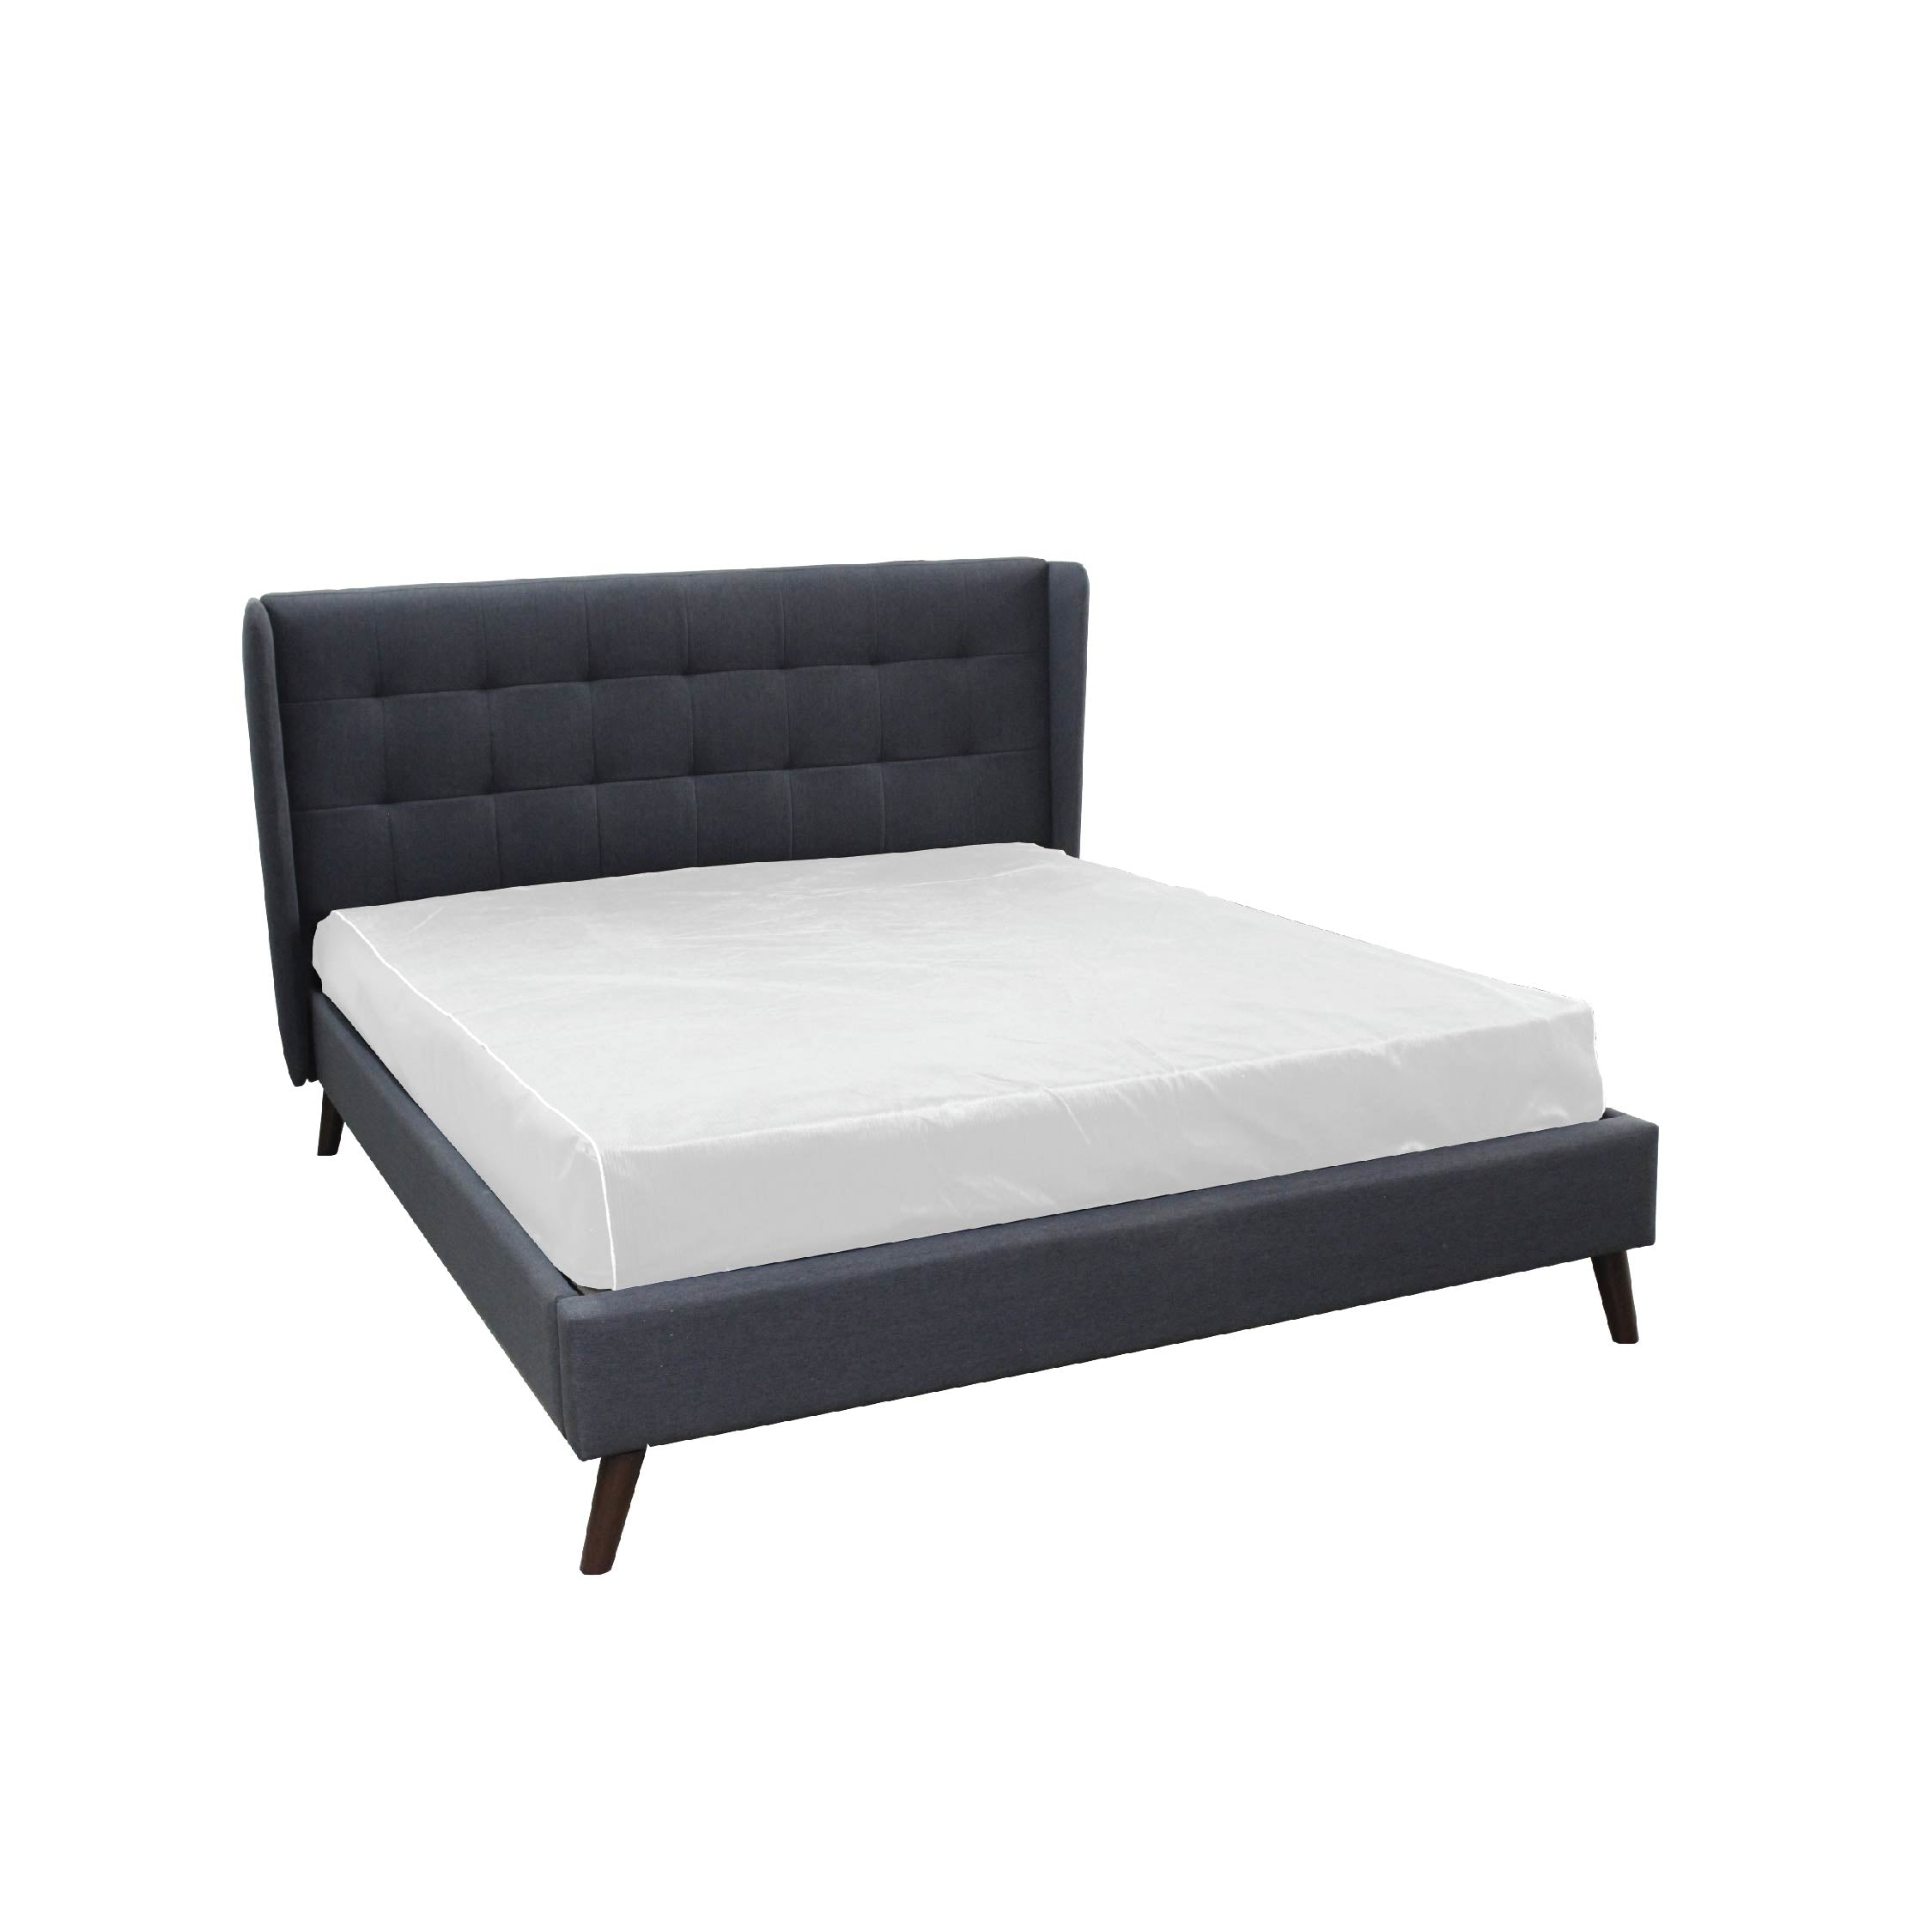 LATAR Wing Bed Frame Queen